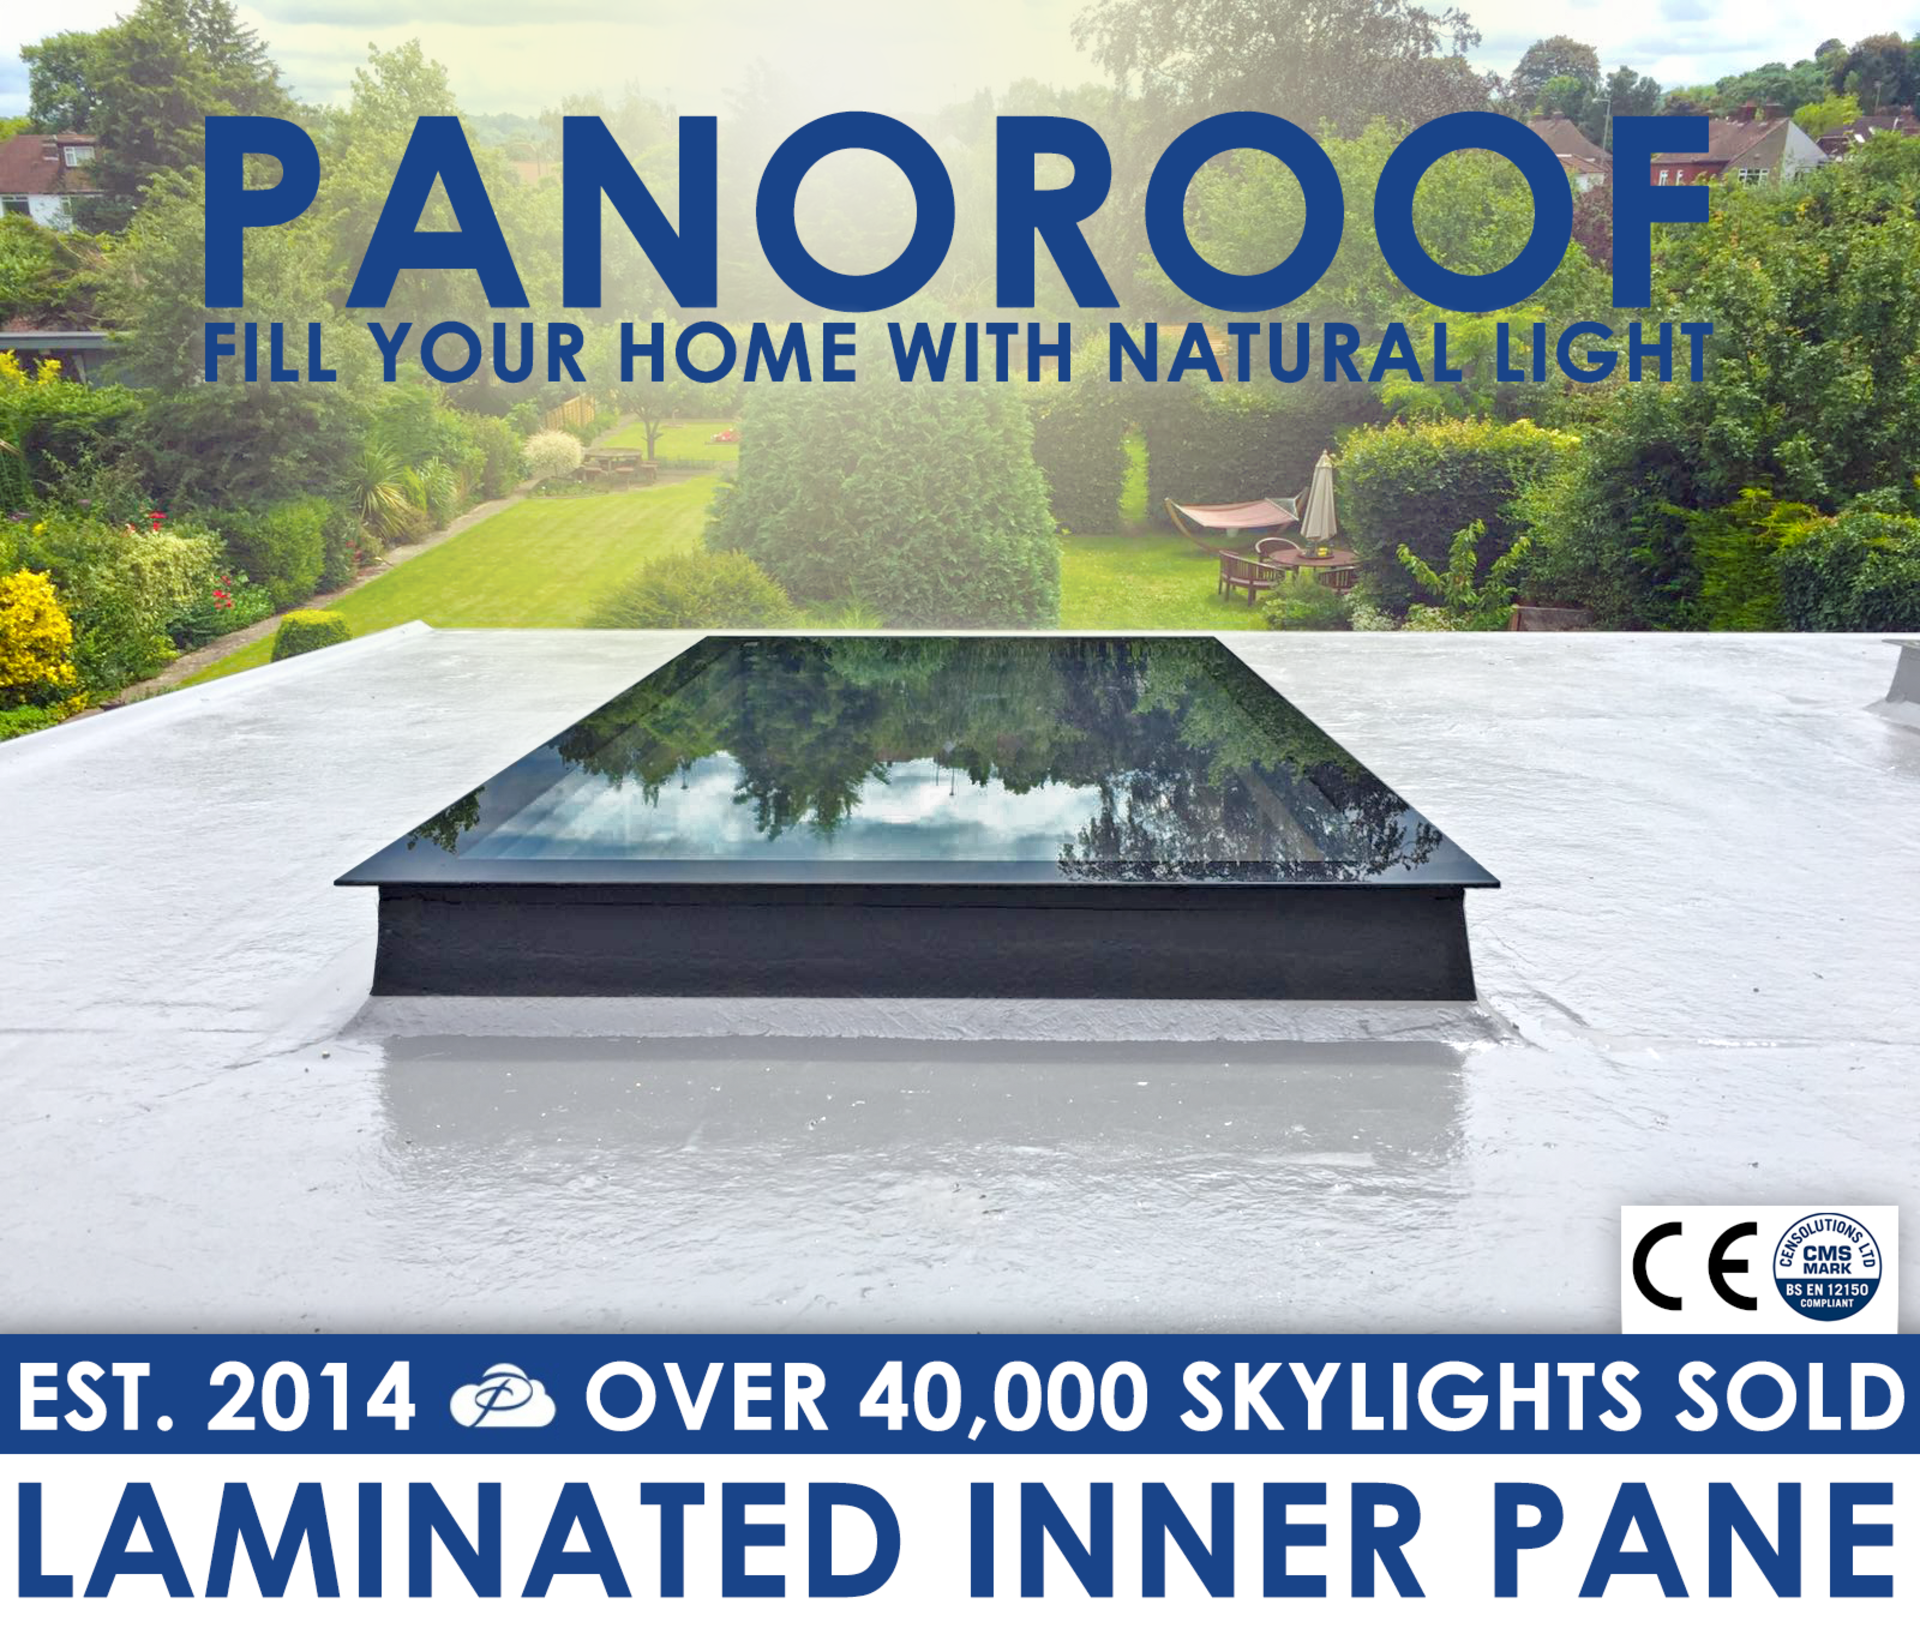 Panoroof 800x2000mm Triple Glazed Self Cleaning WITH 8.8mm LAMINATED INNER PANE (inside Size Visable